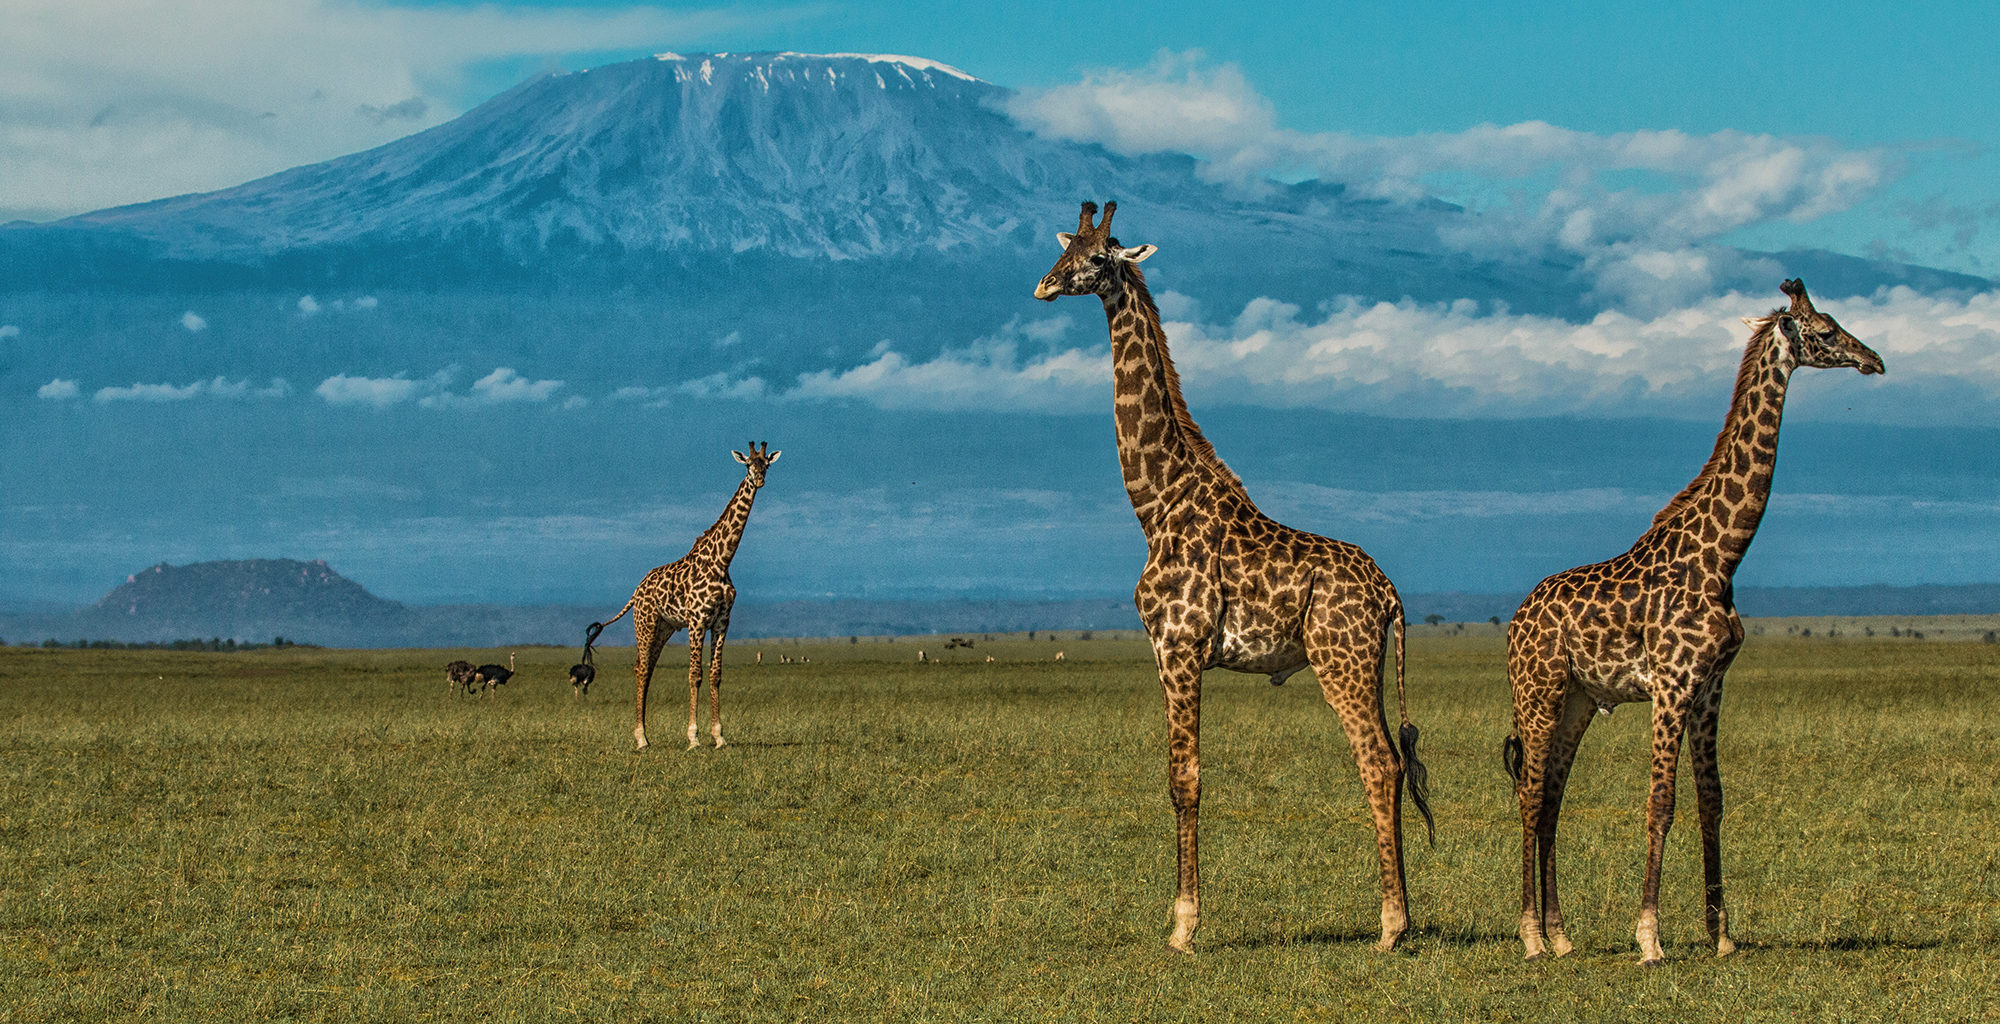 6 Seasonal Guide For Best Time to Visit Amboseli National Park